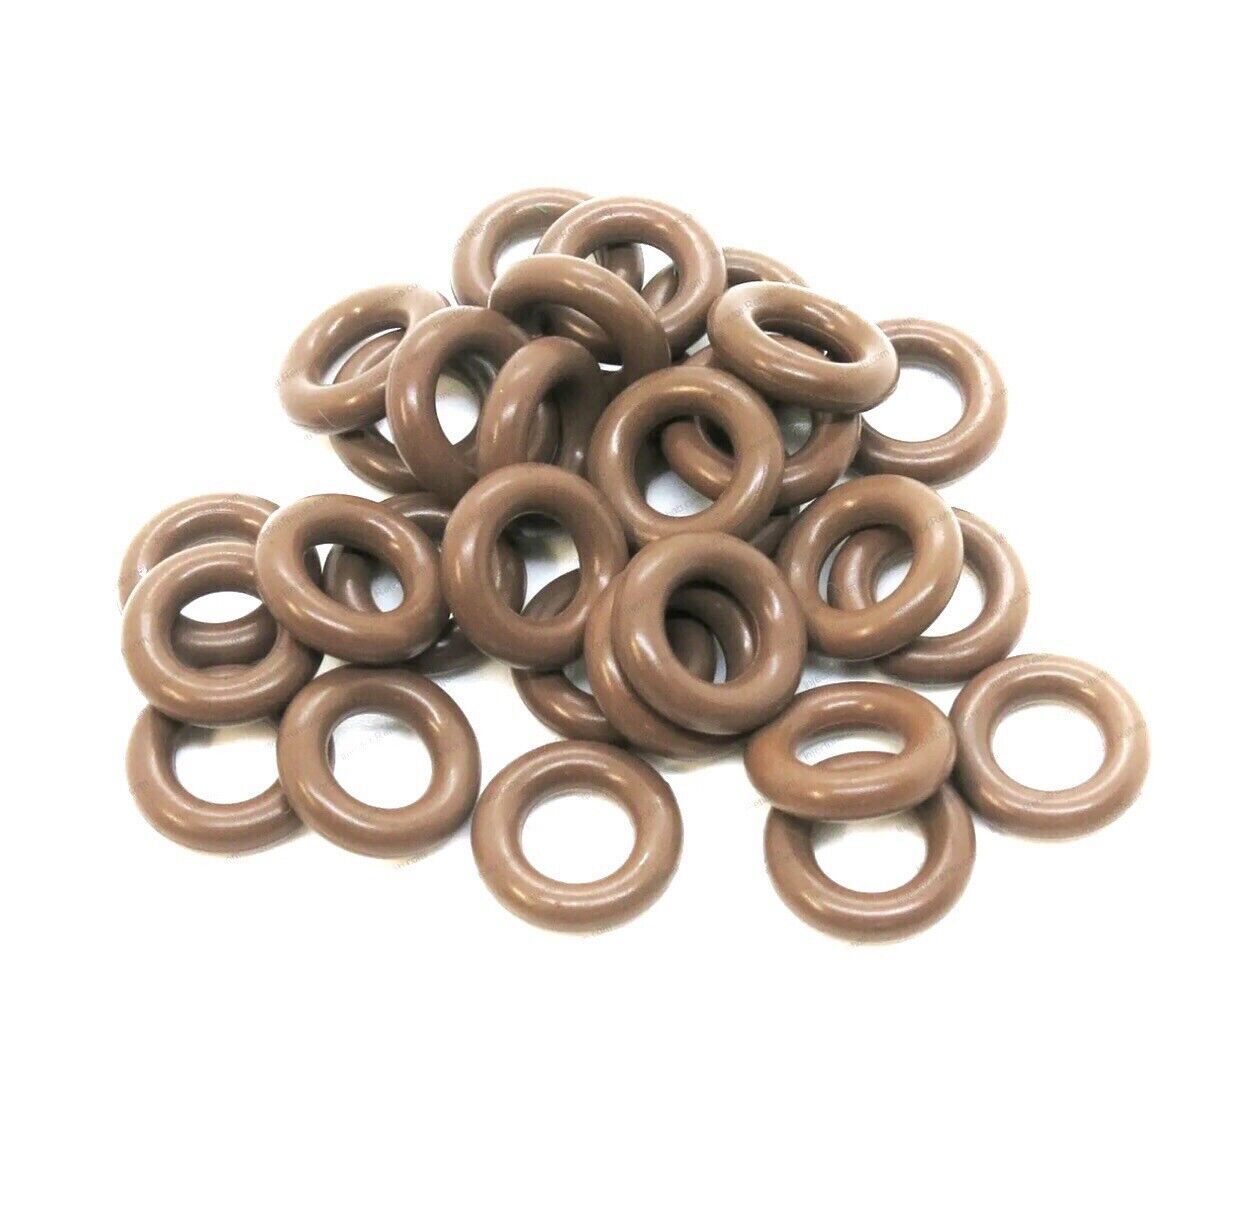 UNIVERSAL Fuel Injector O-Rings,Brown, 7.52x3.53,20pcs,FKM (Equivalent to Viton)